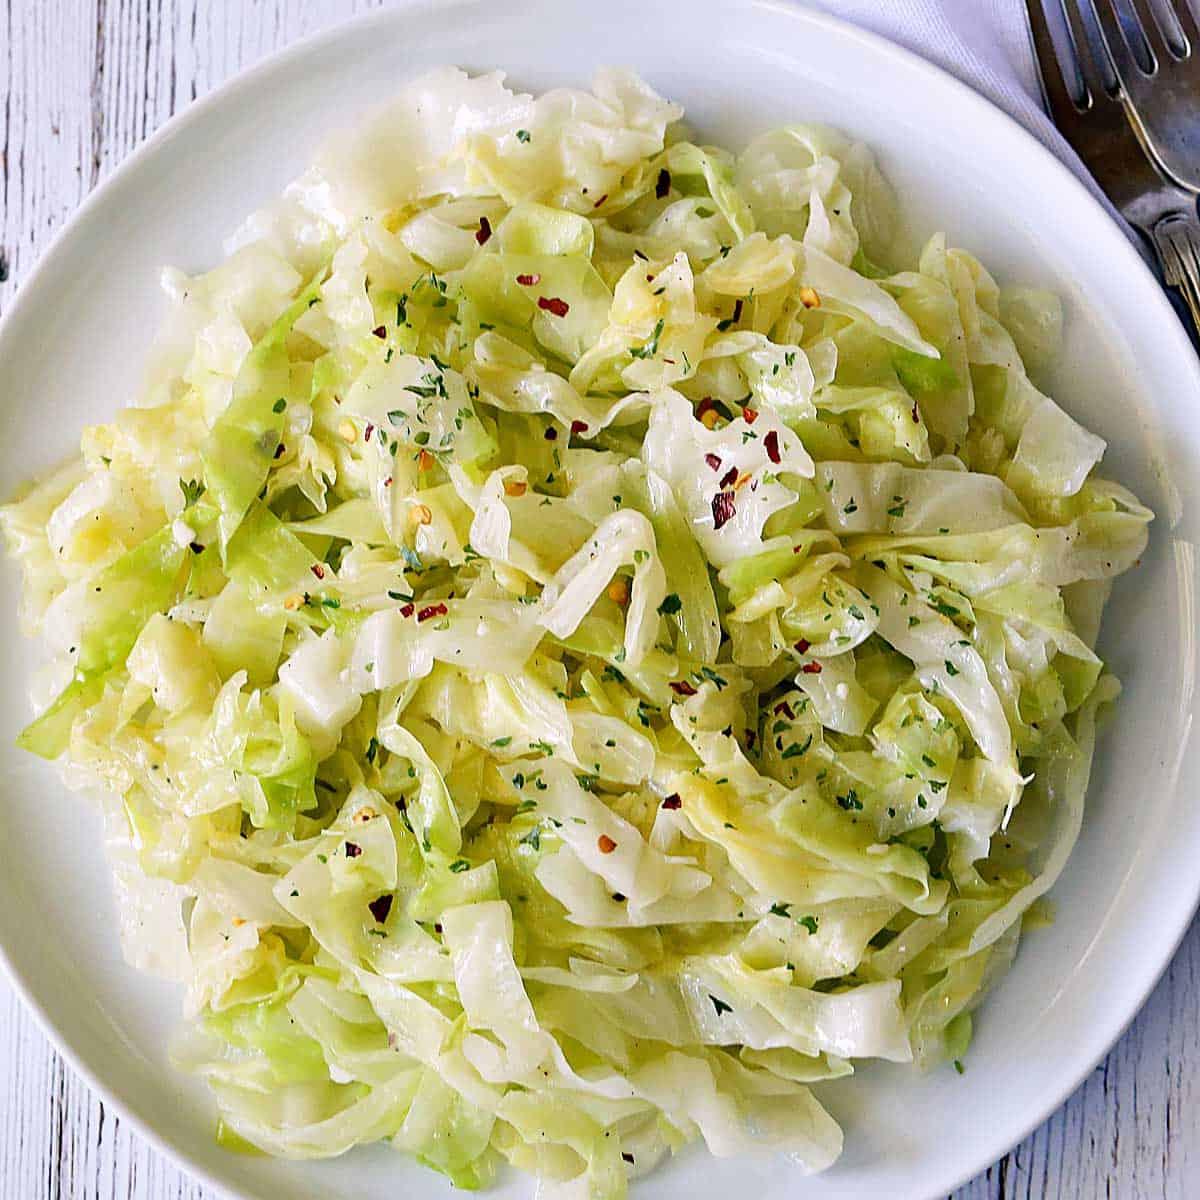 Steamed cabbage is served on a white plate with forks and a napkin.